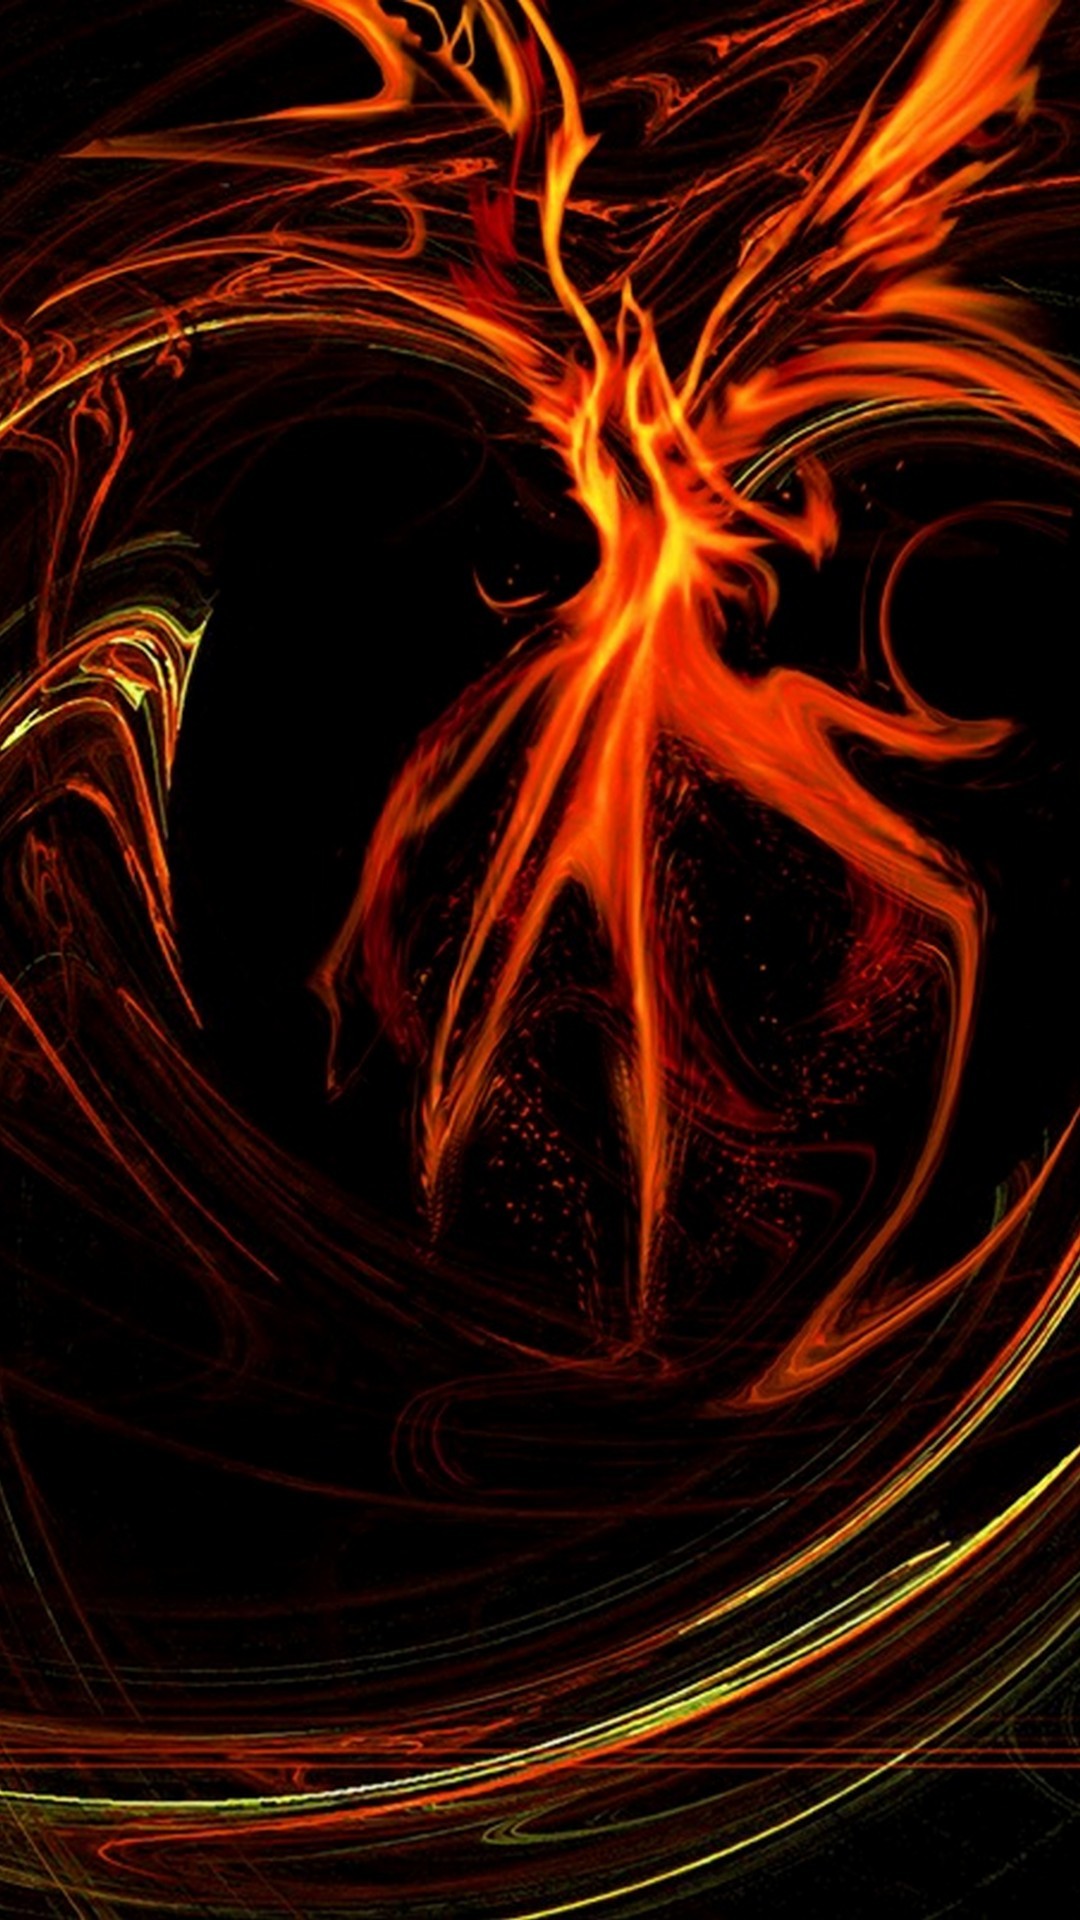 iPhone Wallpaper Dark Phoenix with resolution 1080X1920 pixel. You can make this wallpaper for your iPhone 5, 6, 7, 8, X backgrounds, Mobile Screensaver, or iPad Lock Screen